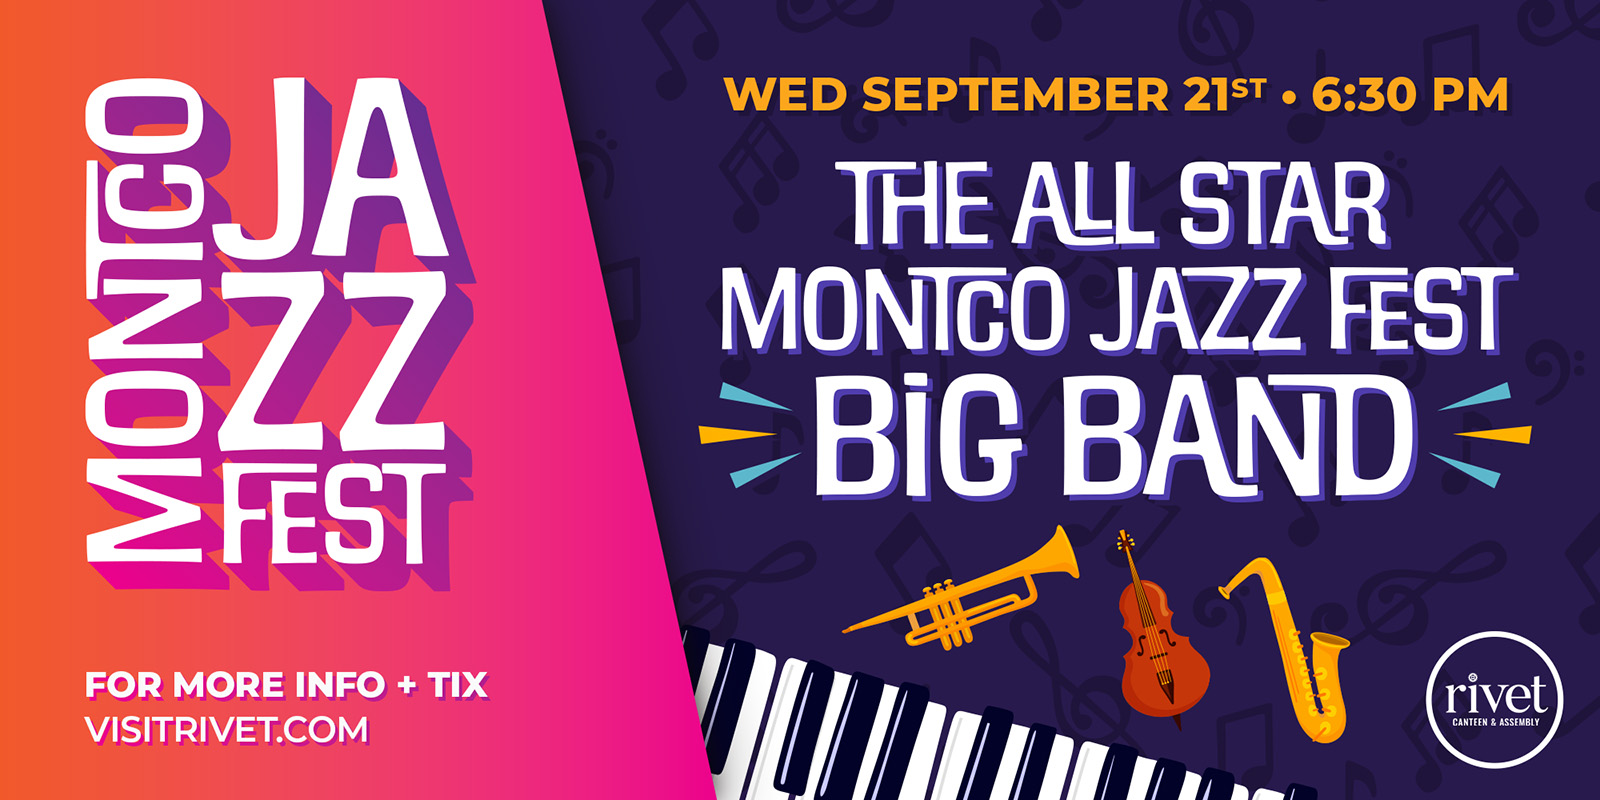 The All Star Montco Jazz Fest Big Band at Rivet: Canteen & Assembly, as part of the Montco Jazz Festival on Wednesday, September 21st, 2022.